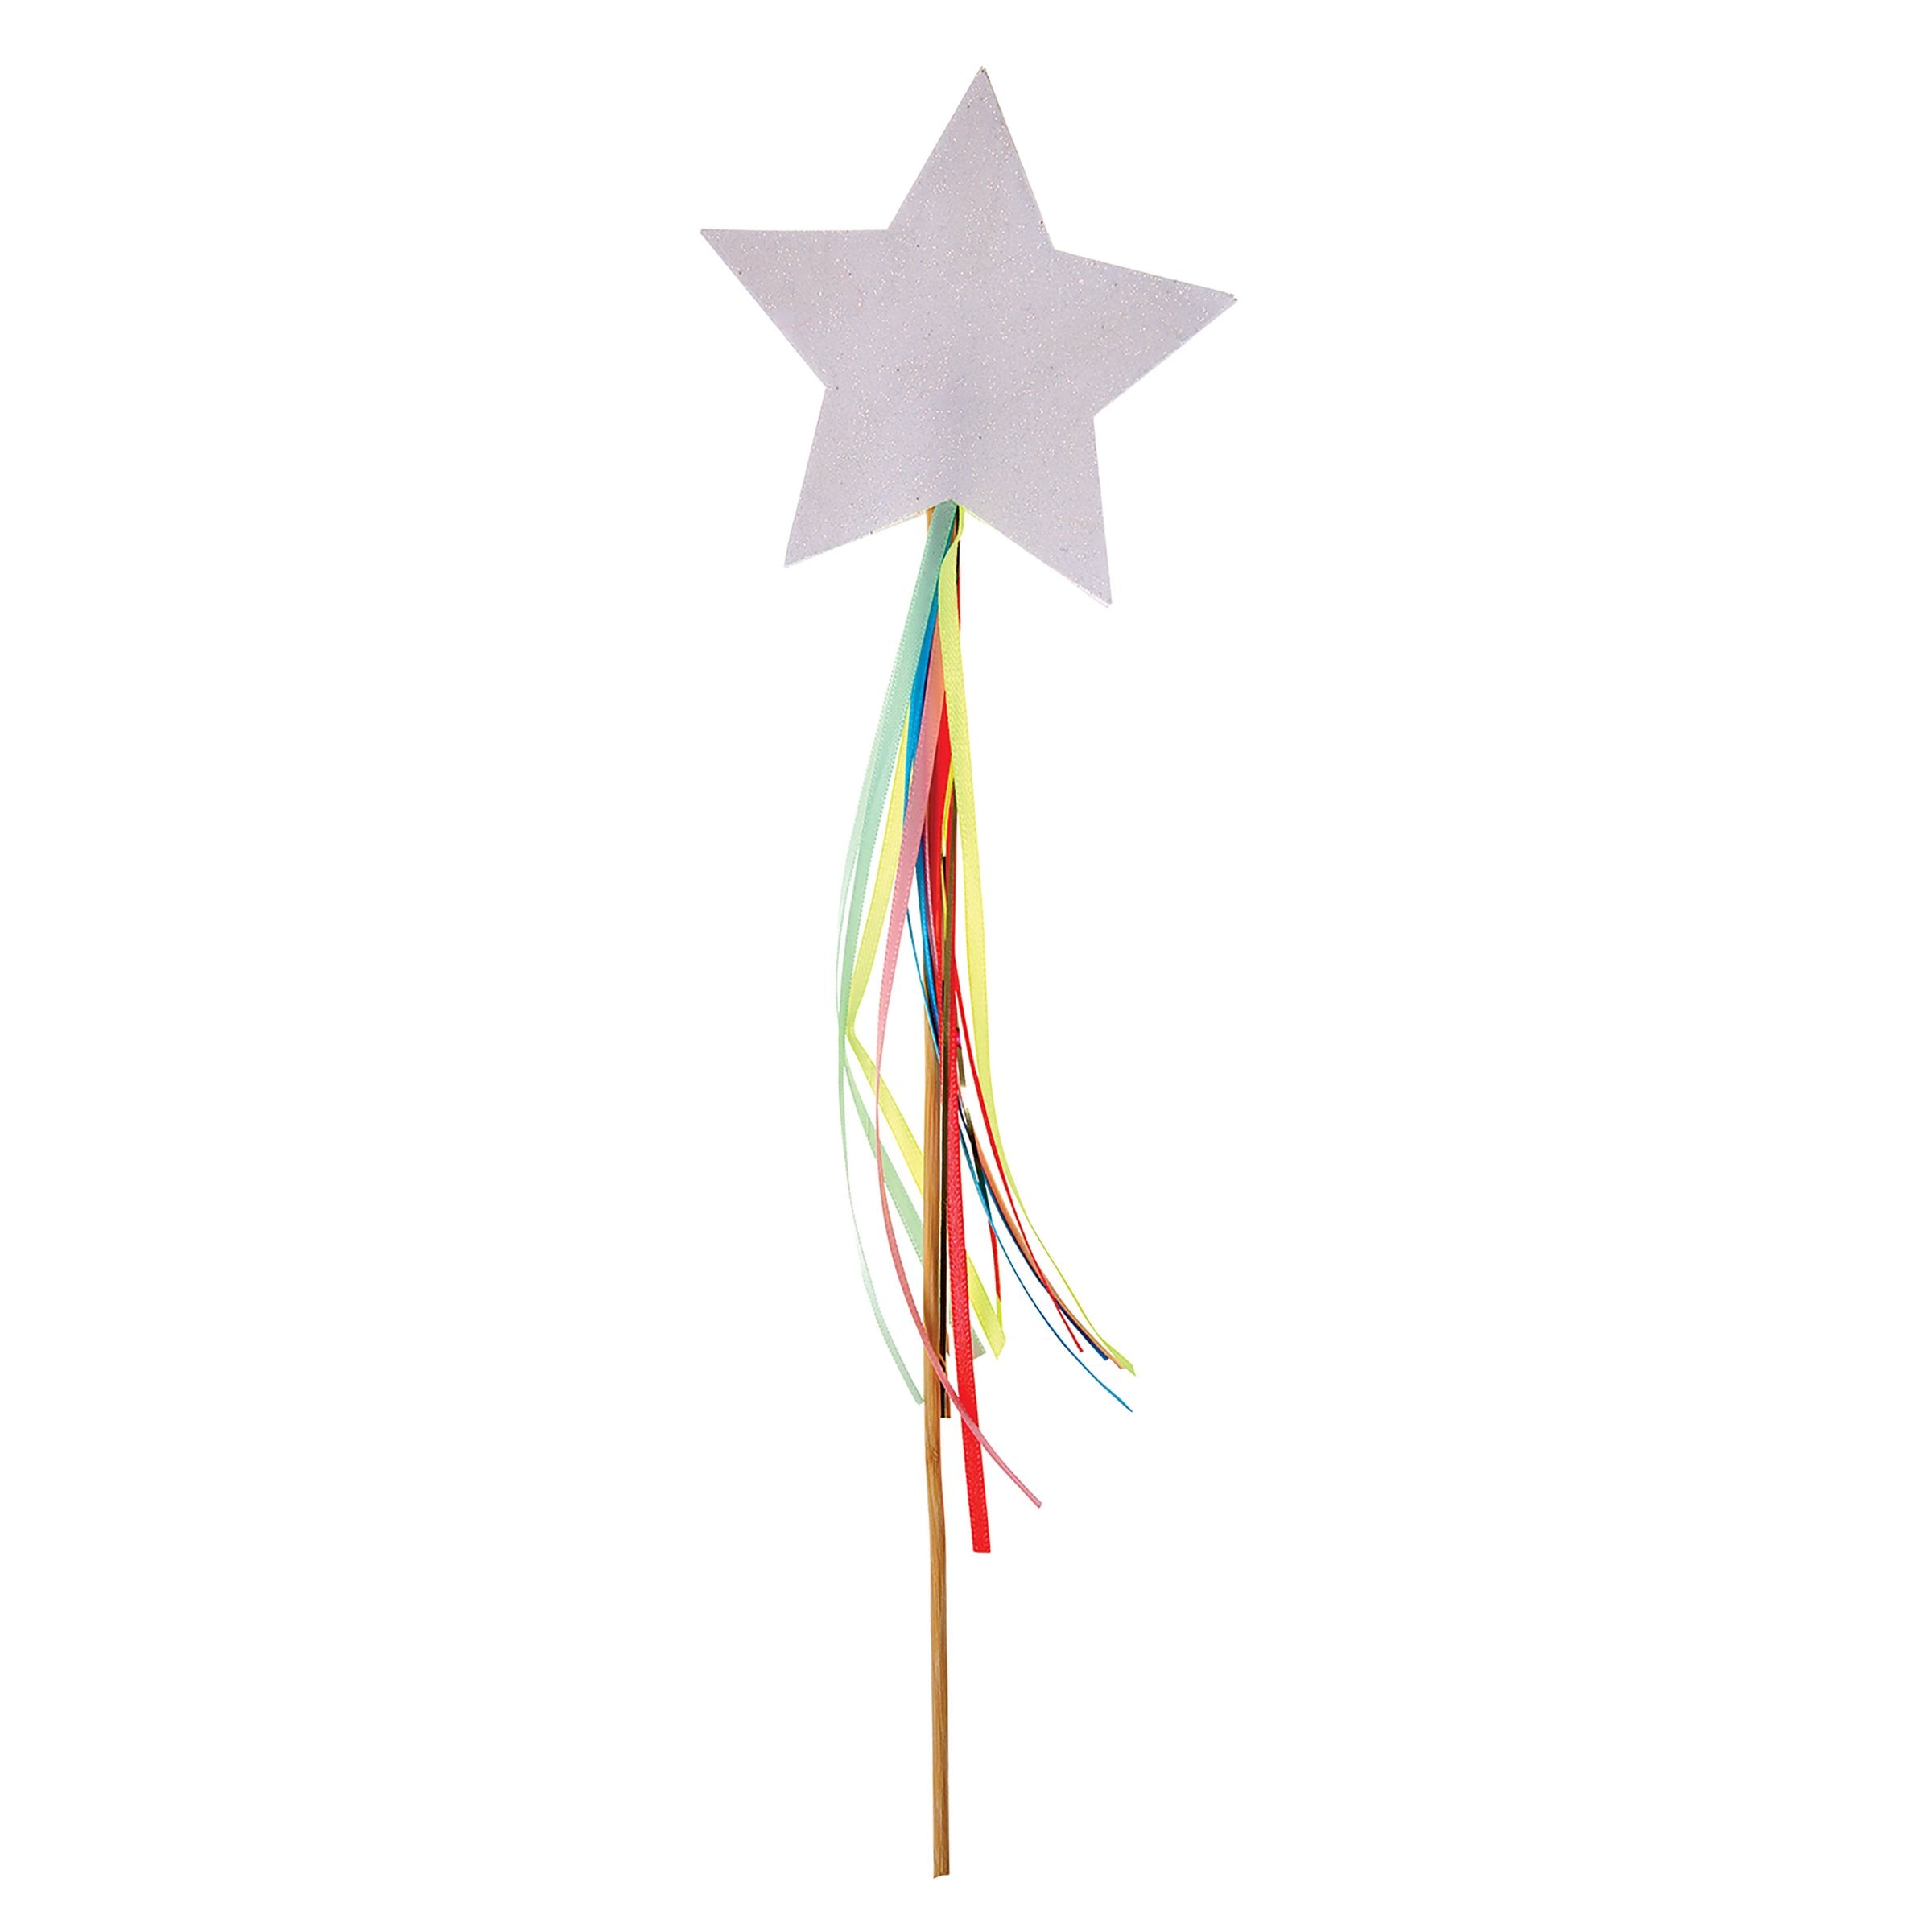 Each fairy wand has crystal glitter and colourful ribbons.